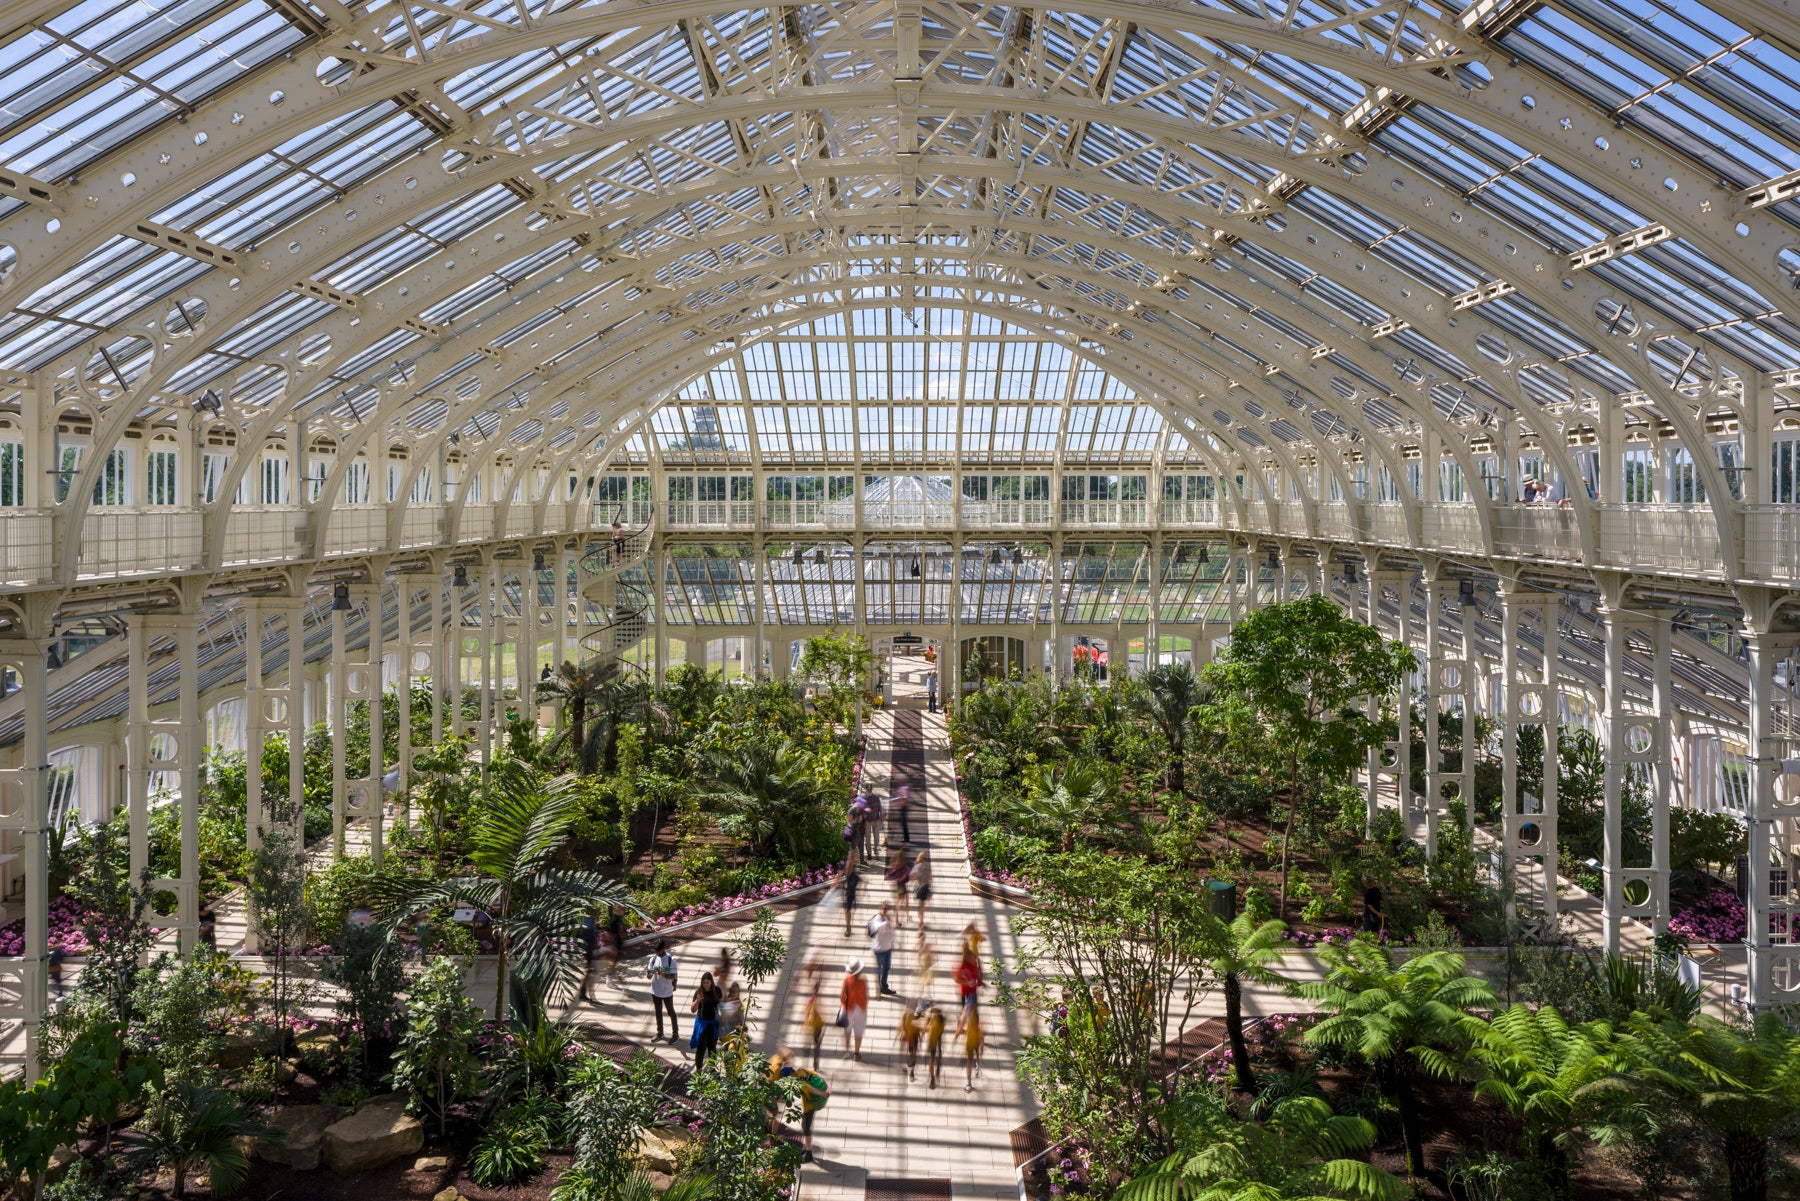 Discover rare and threatened plants in the impressive Temperate House at Kew